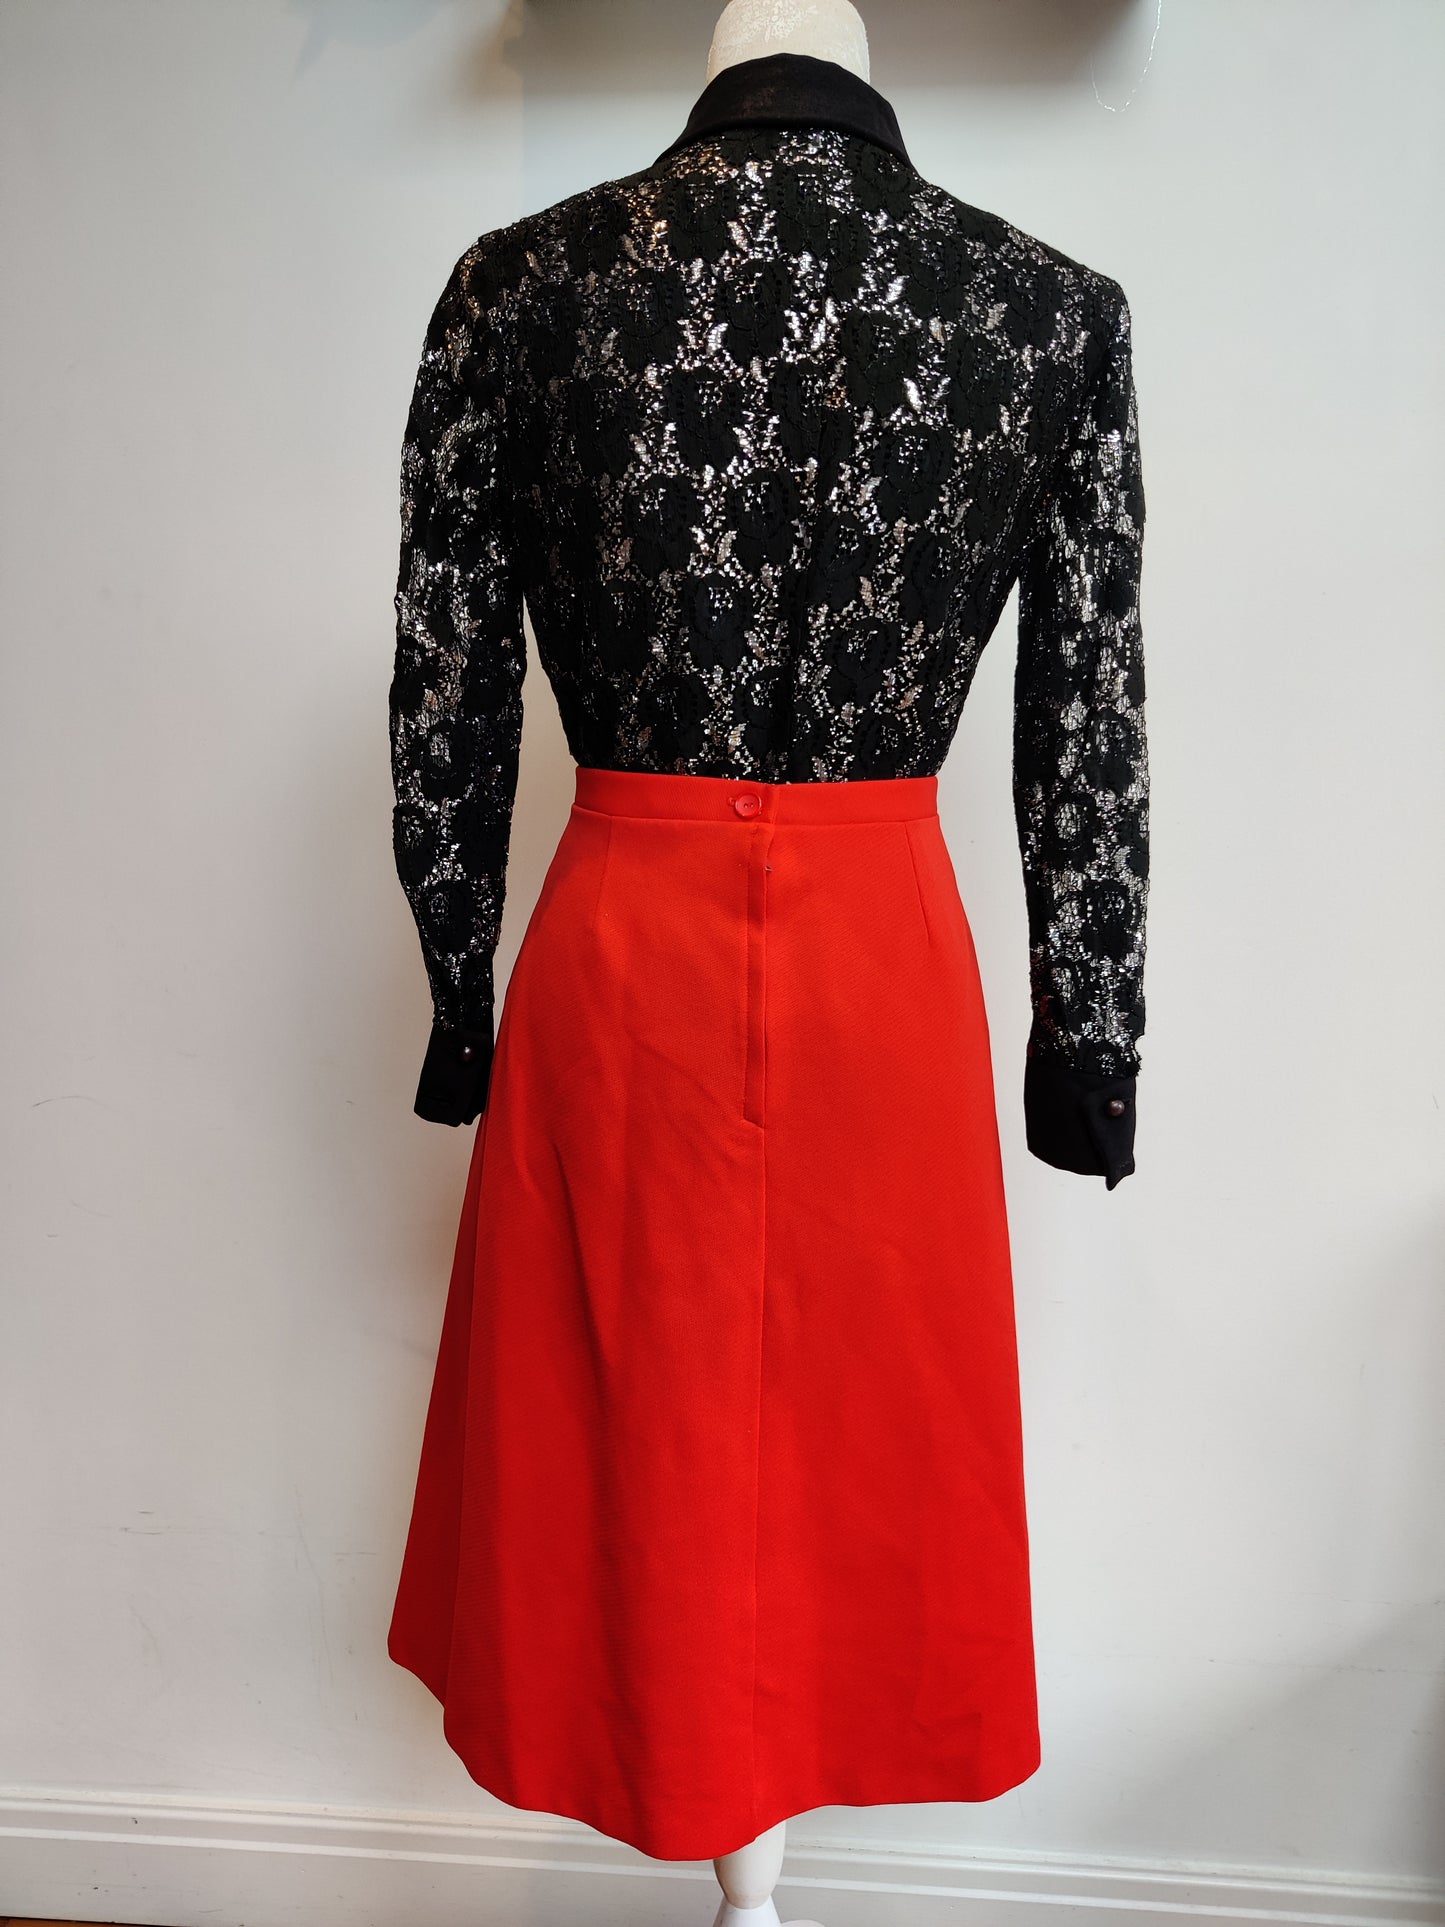 Red vintage A-line skirt size 16